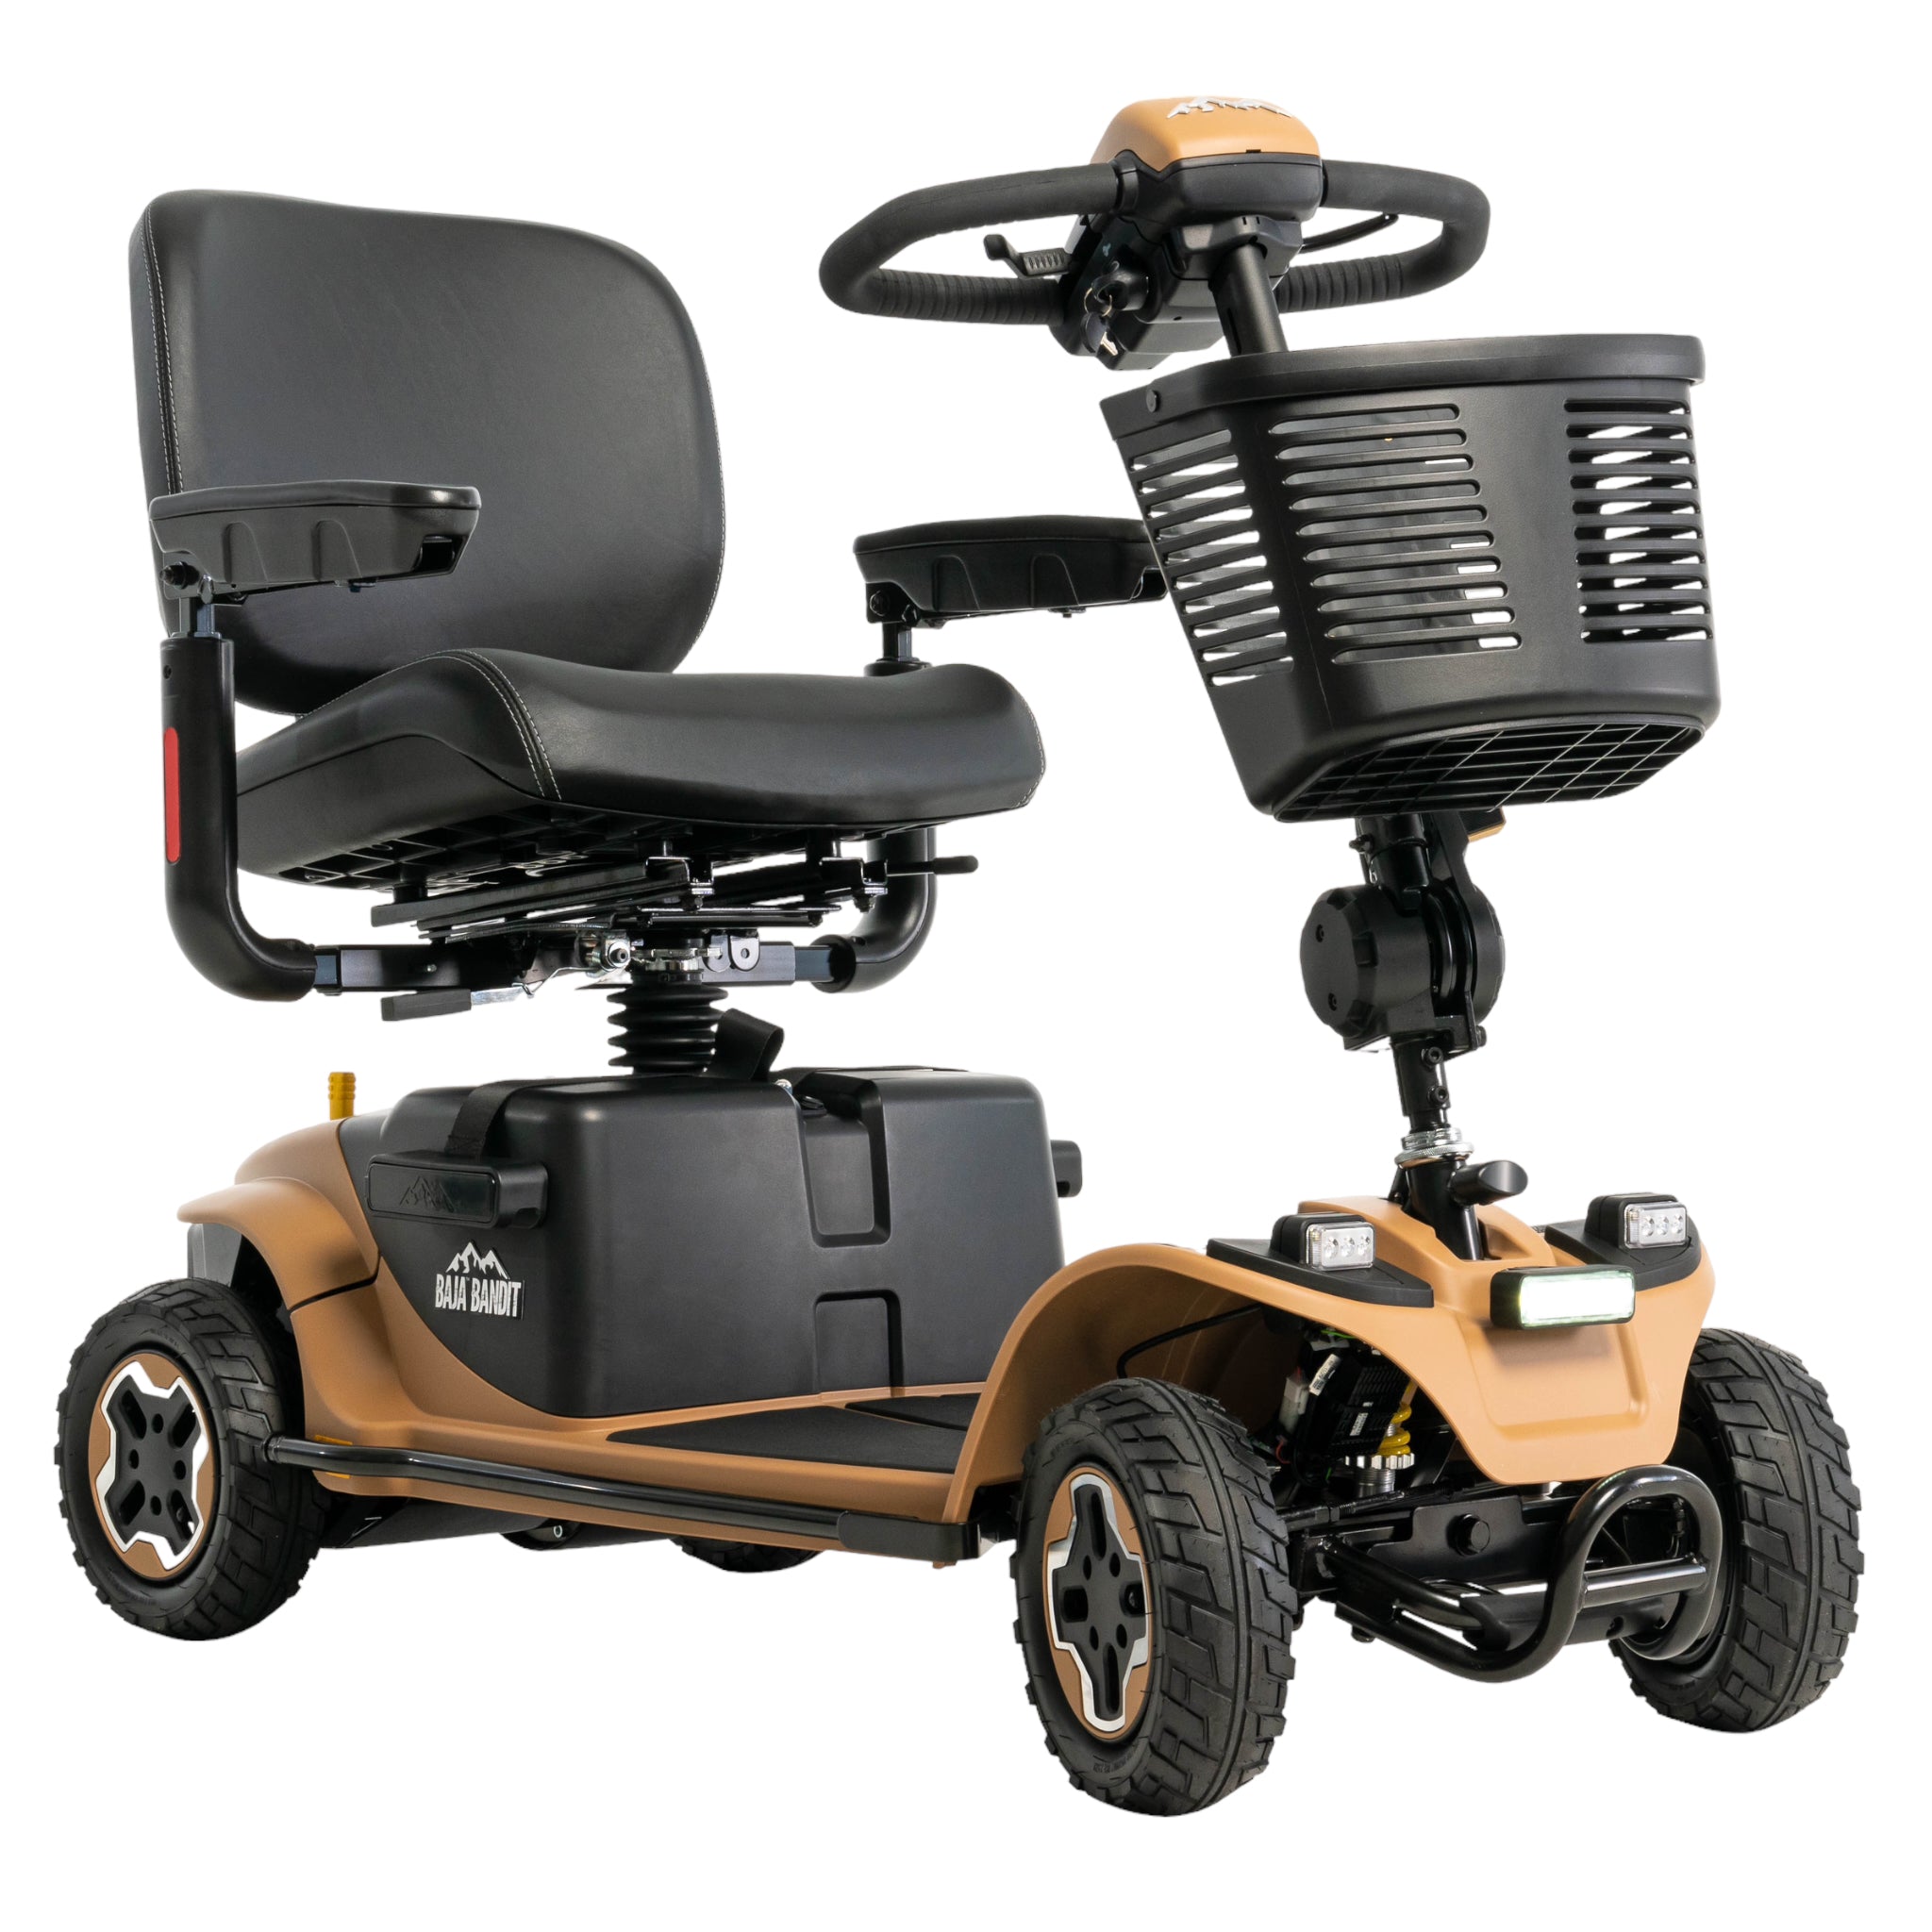 New Pride Mobility Baja Bandit Full-Size Mobility Scooter | 18 x 17 Stadium Seat | 400 LB Weight Capacity